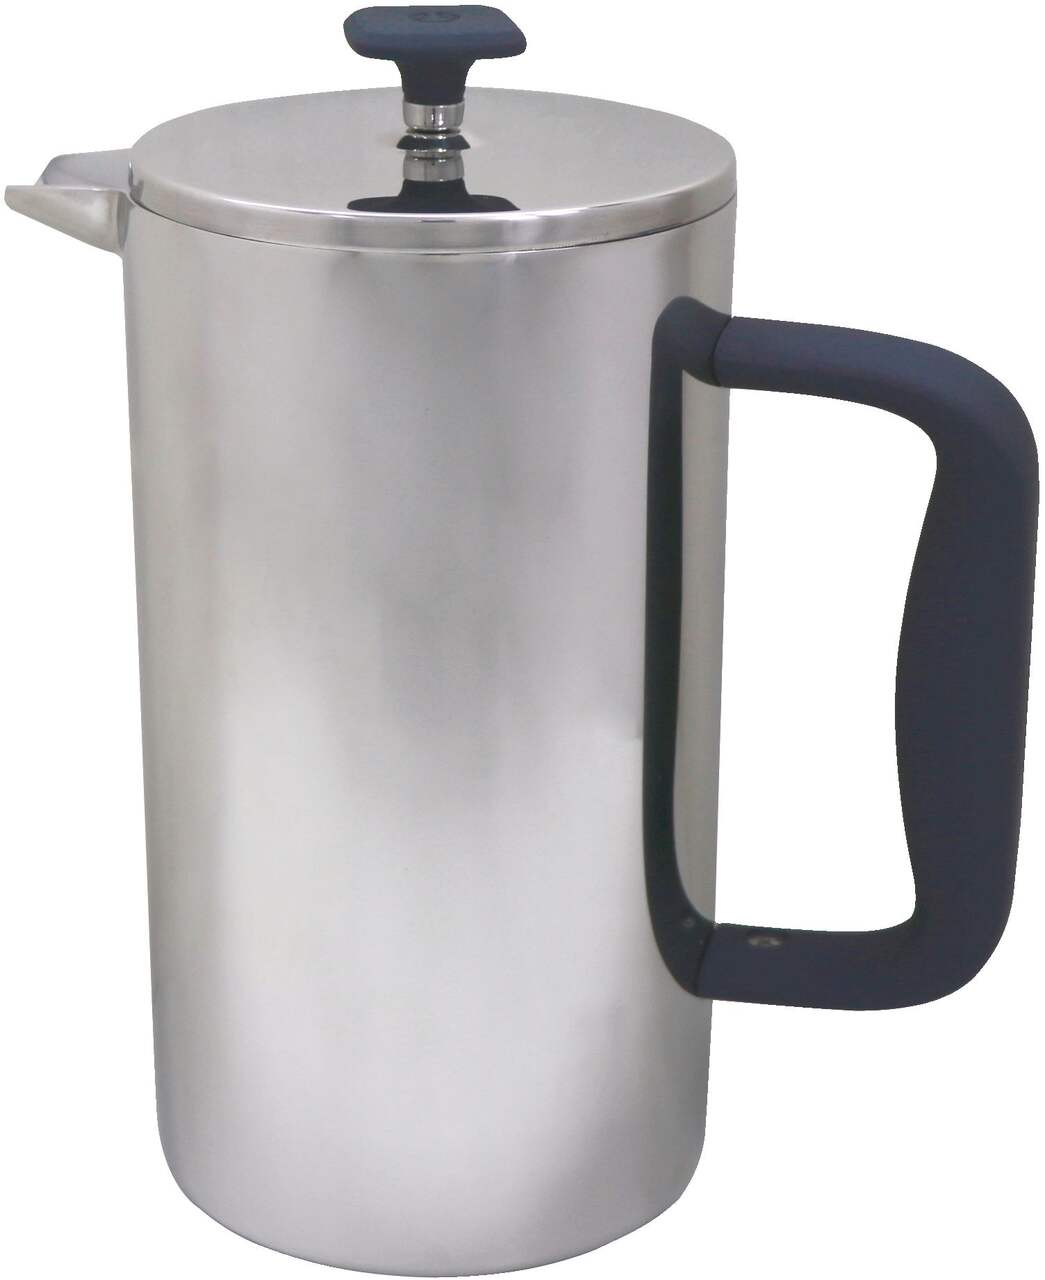 https://media-www.canadiantire.ca/product/living/kitchen/dining-and-entertaining/1425859/paderno-stainless-steel-french-press-ef339efb-7acd-4e73-be4e-eca4b377f3ff-jpgrendition.jpg?imdensity=1&imwidth=1244&impolicy=mZoom